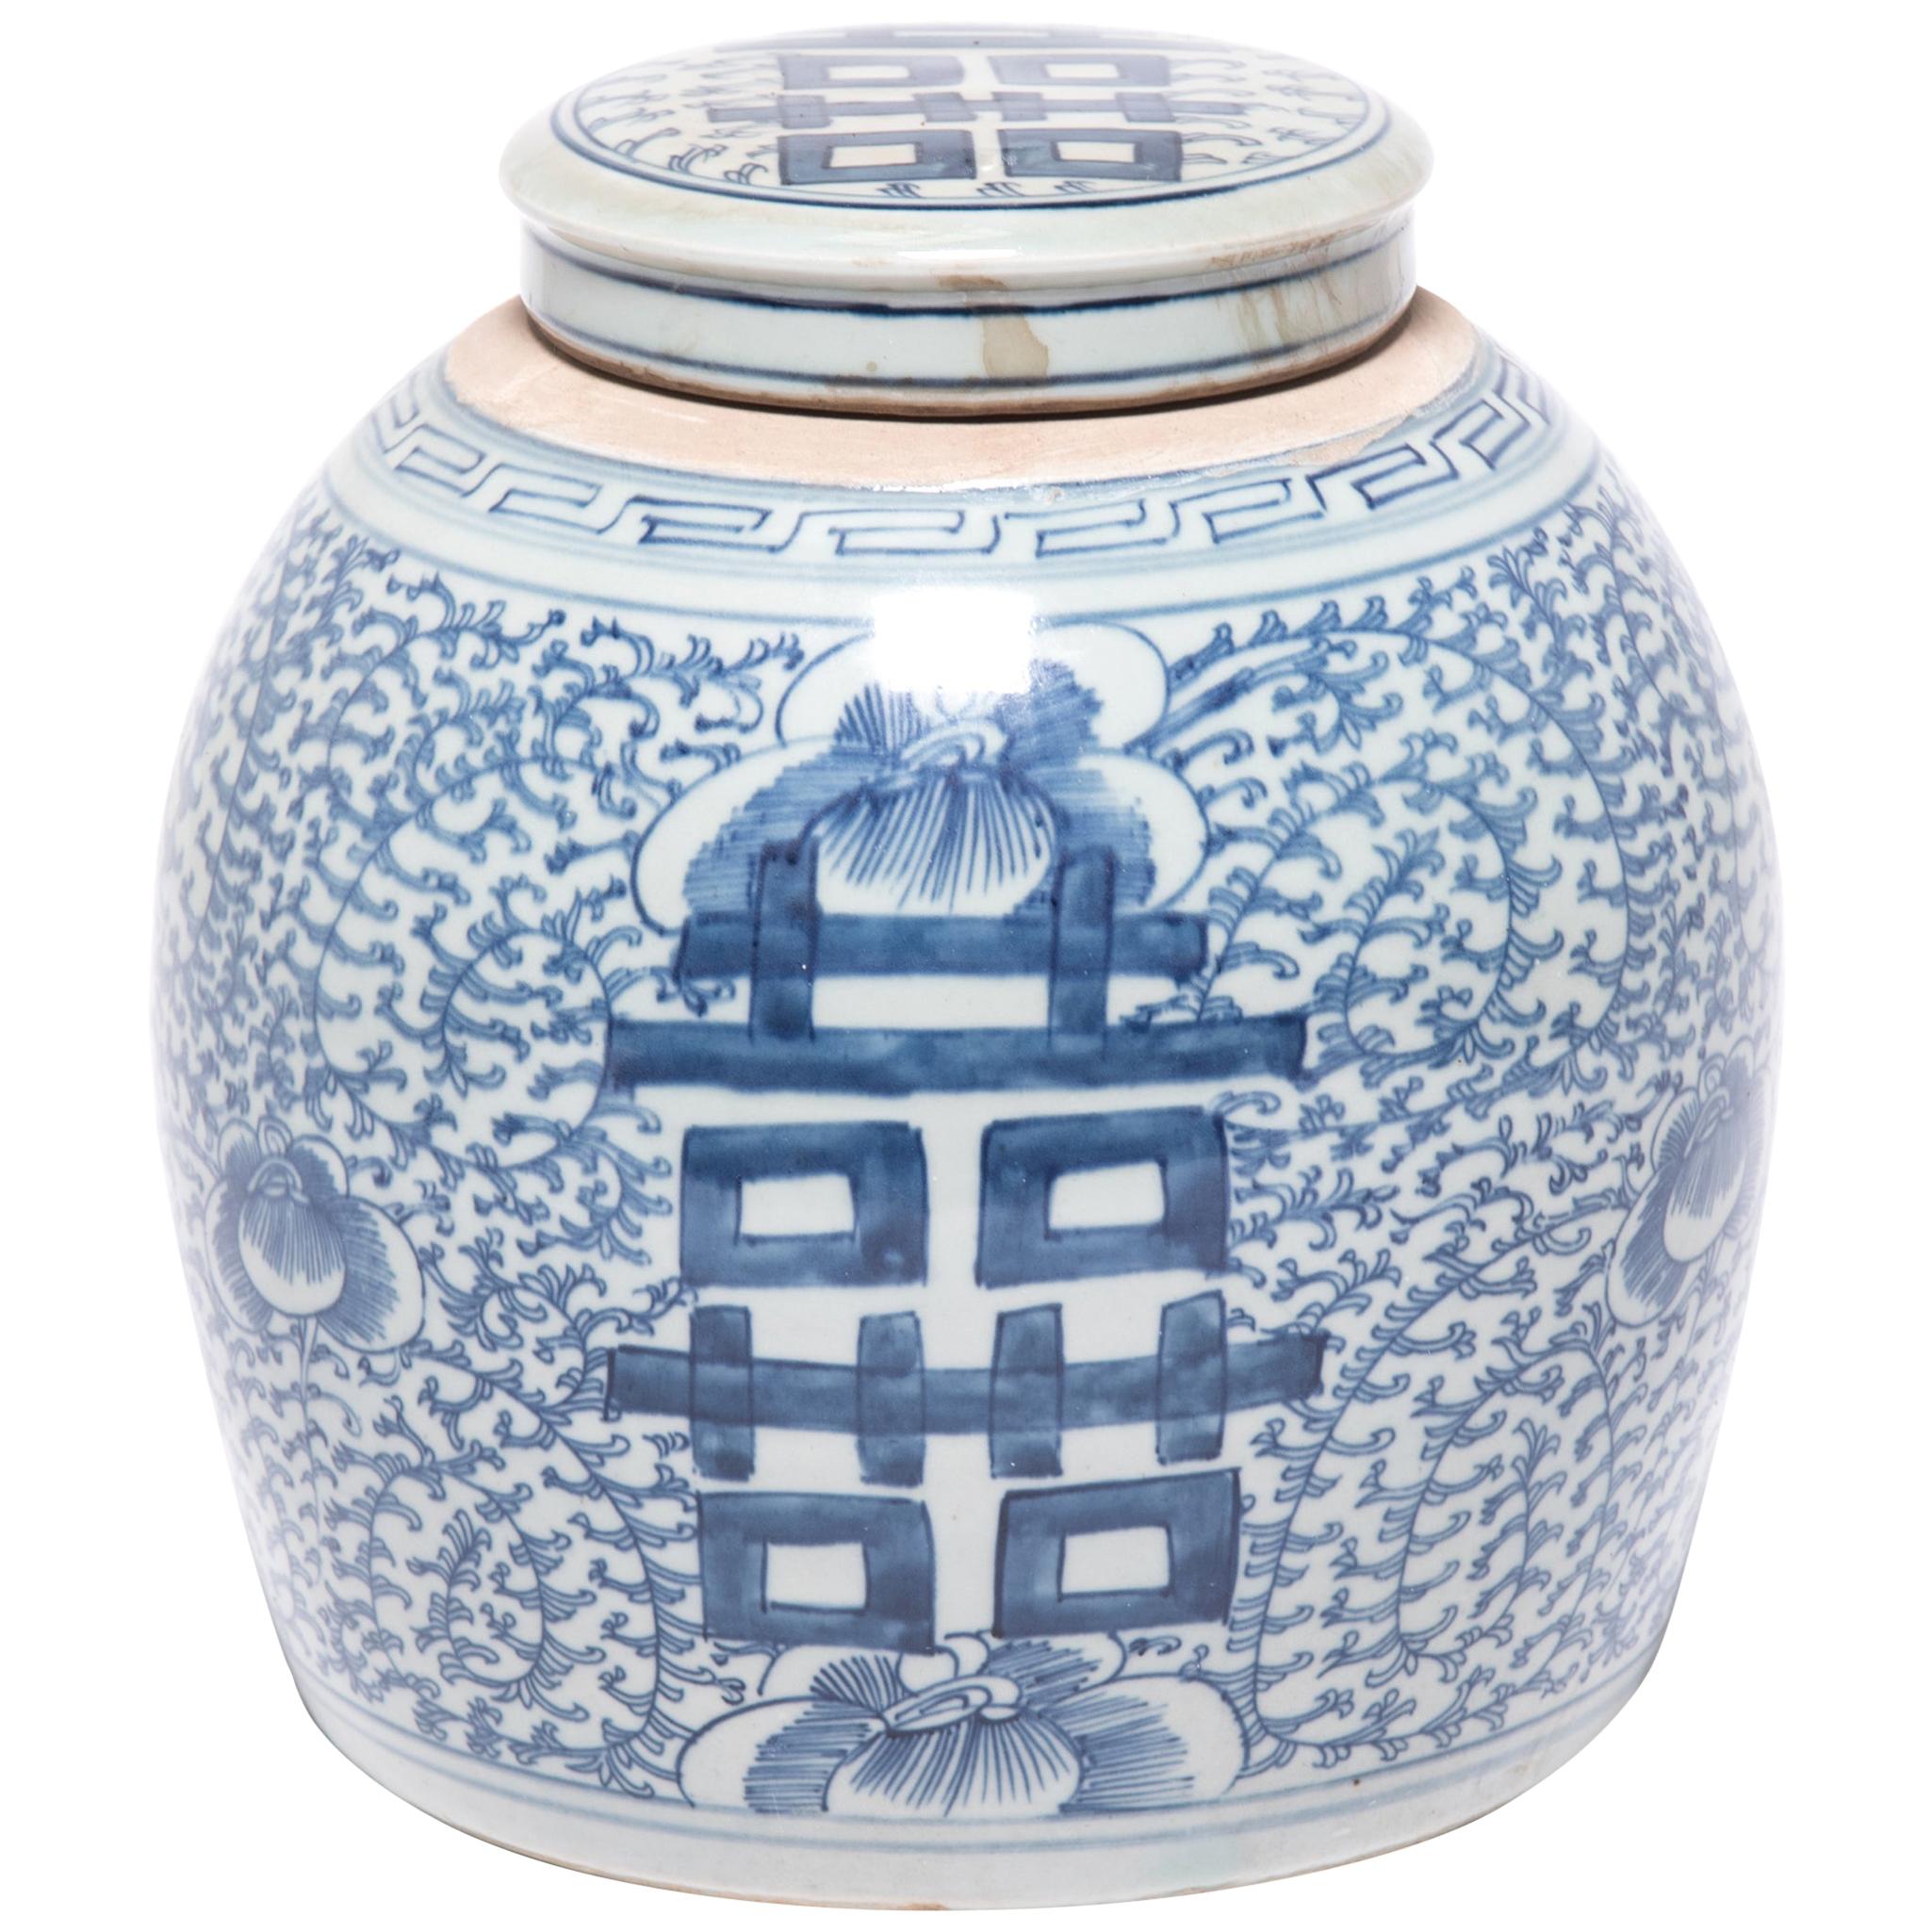 Chinese Blue and White Double Happiness Covered Jar